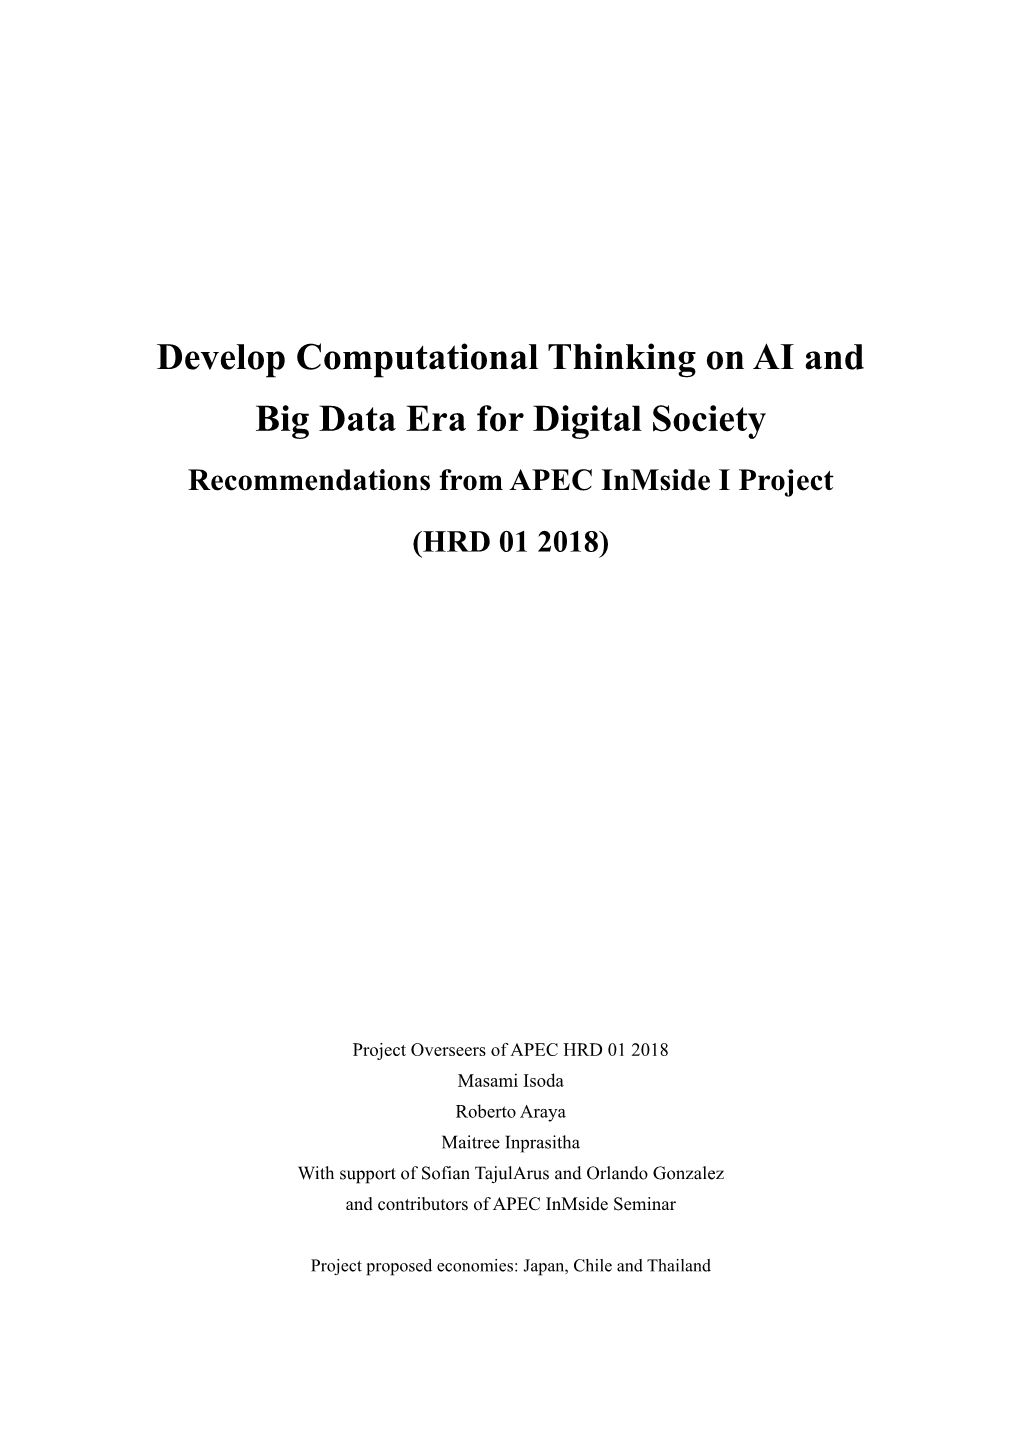 Develop Computational Thinking on AI and Big Data Era for Digital Society Recommendations from APEC Inmside I Project (HRD 01 2018)